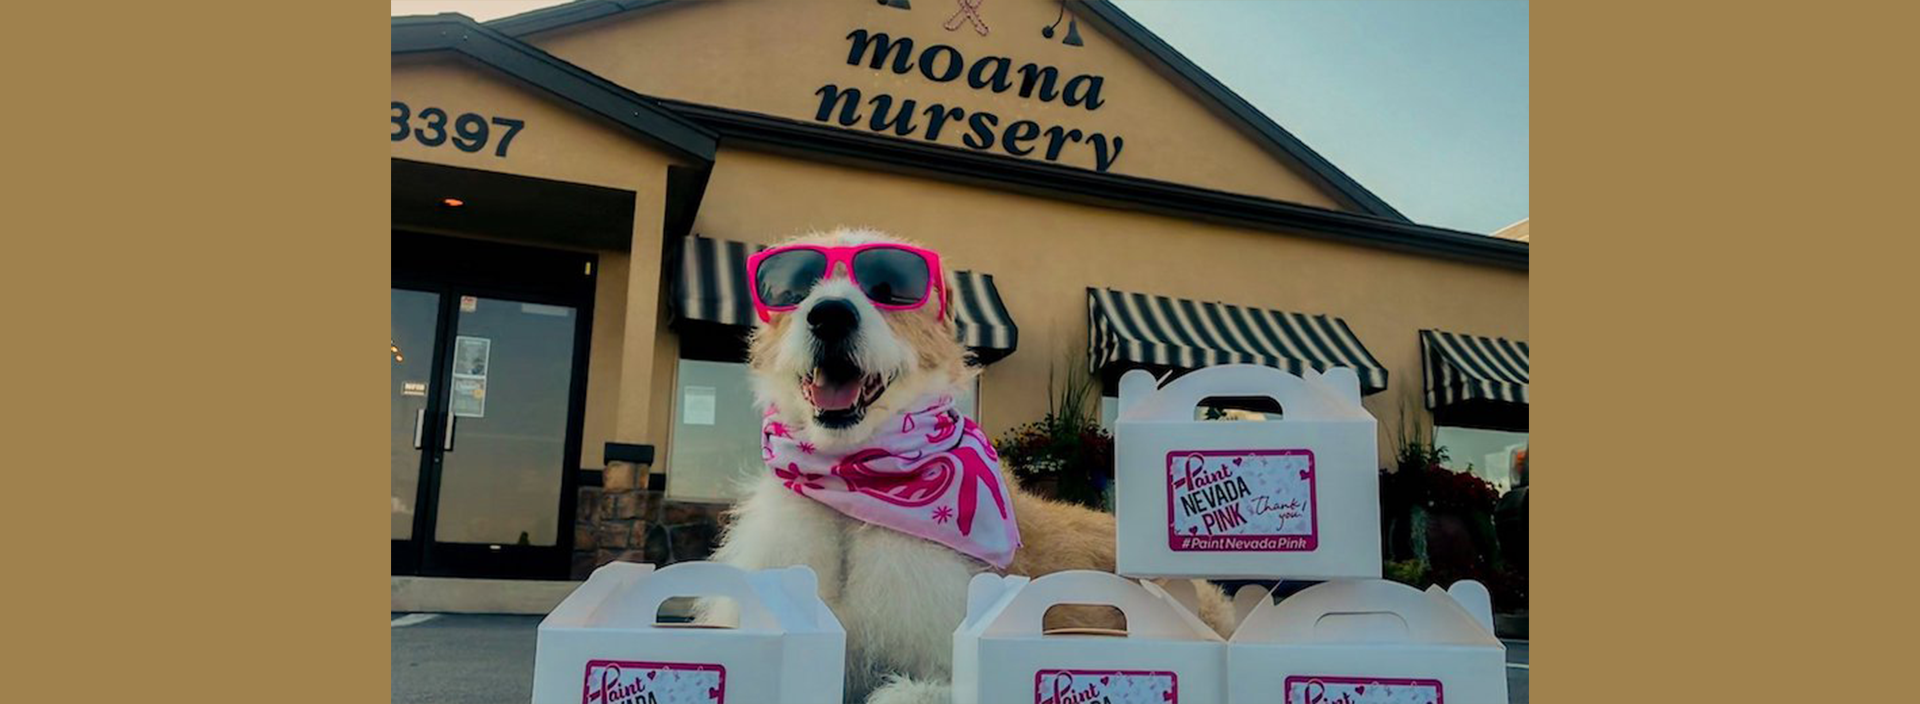 Sunglassed dog in front of Moana Nursery